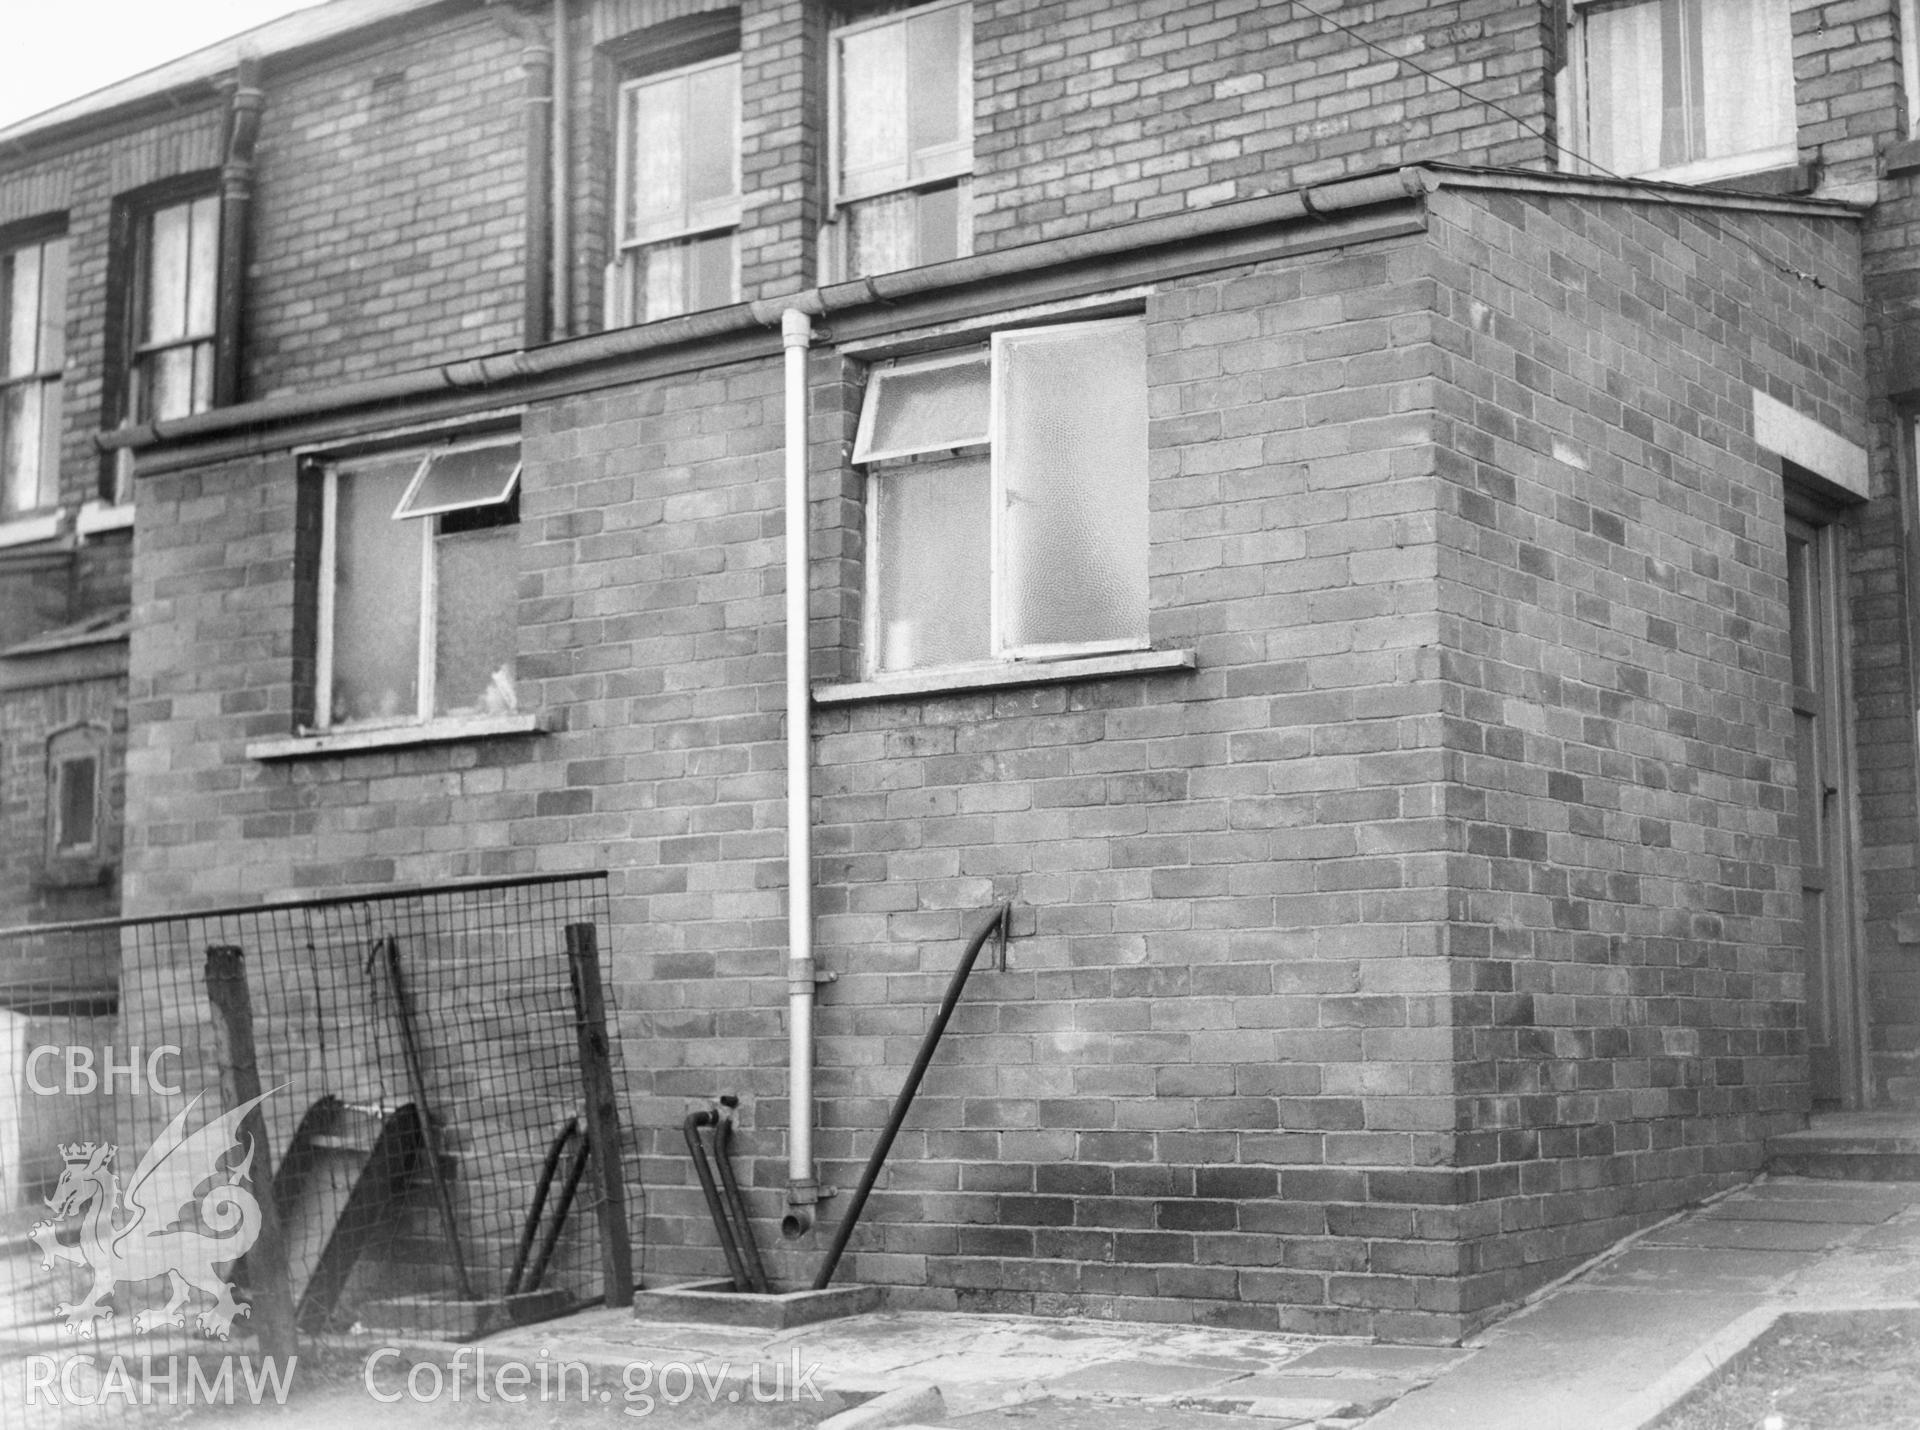 1 b/w print showing new rear extension on houses on Council Street, Ebbw Vale, used as an illustration of the Housing Improvement Grant scheme for exhibitions held at Ministry of Housing stands at agricultural shows (1960); collated by the former Central Office of Information.